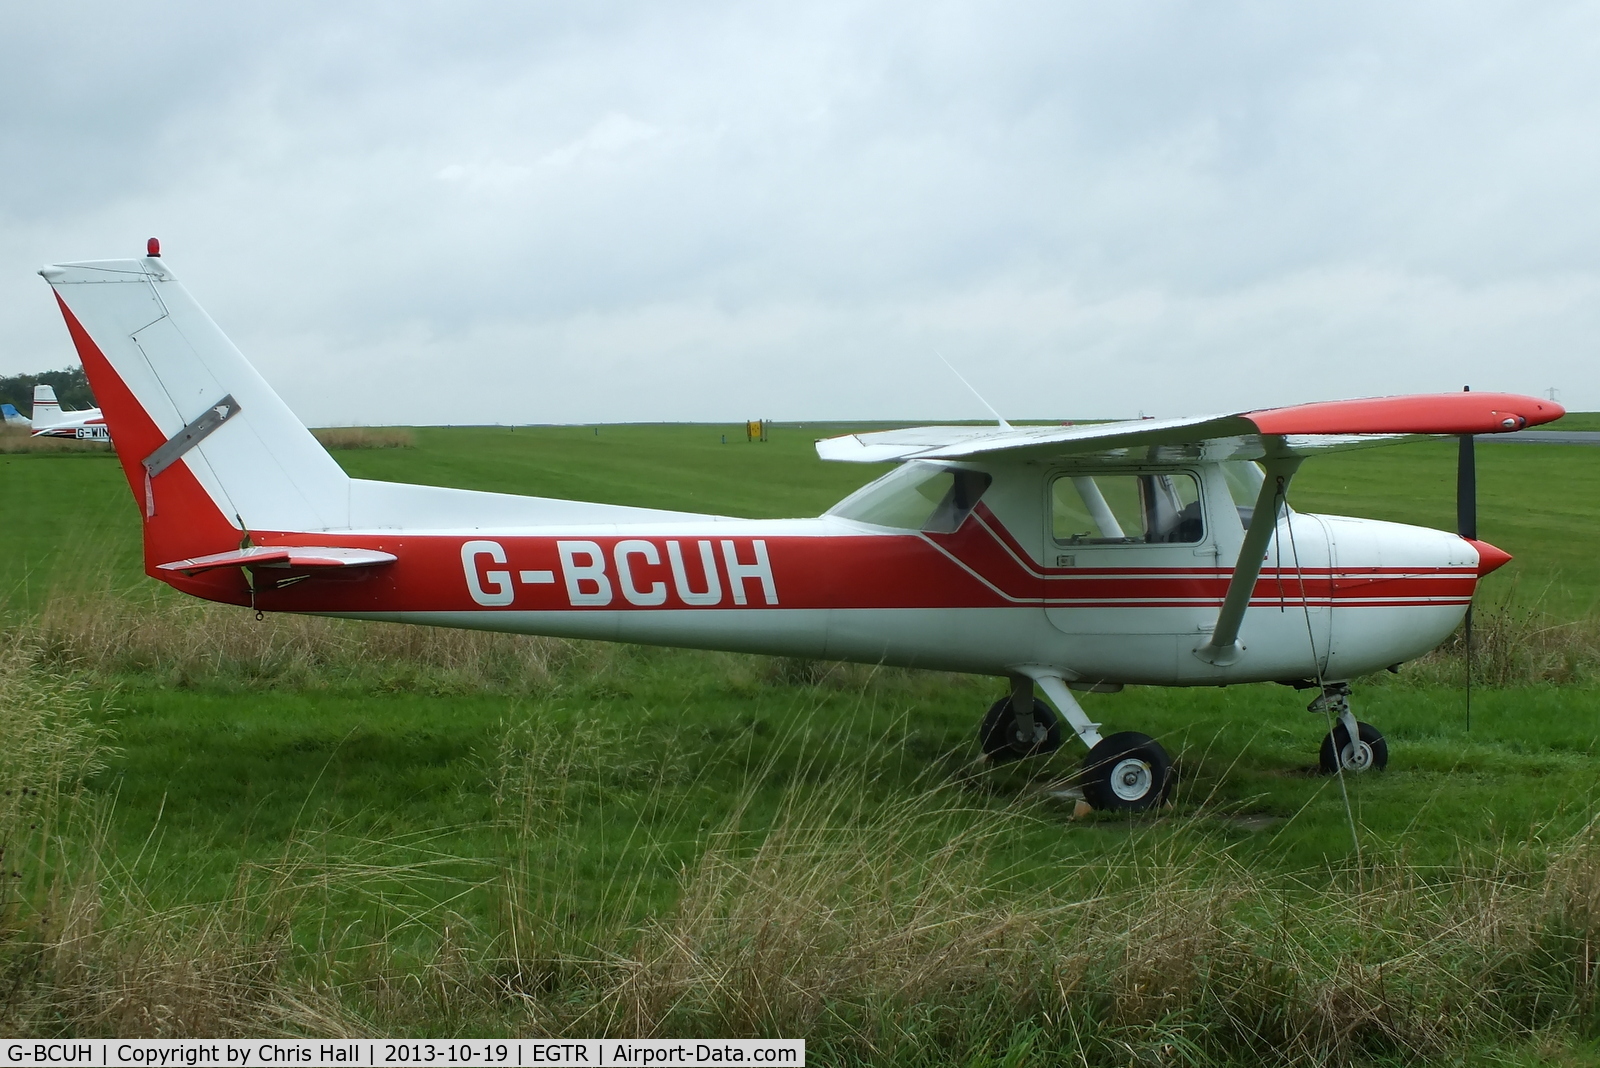 G-BCUH, 1975 Cessna F150M C/N 1195, privately owned